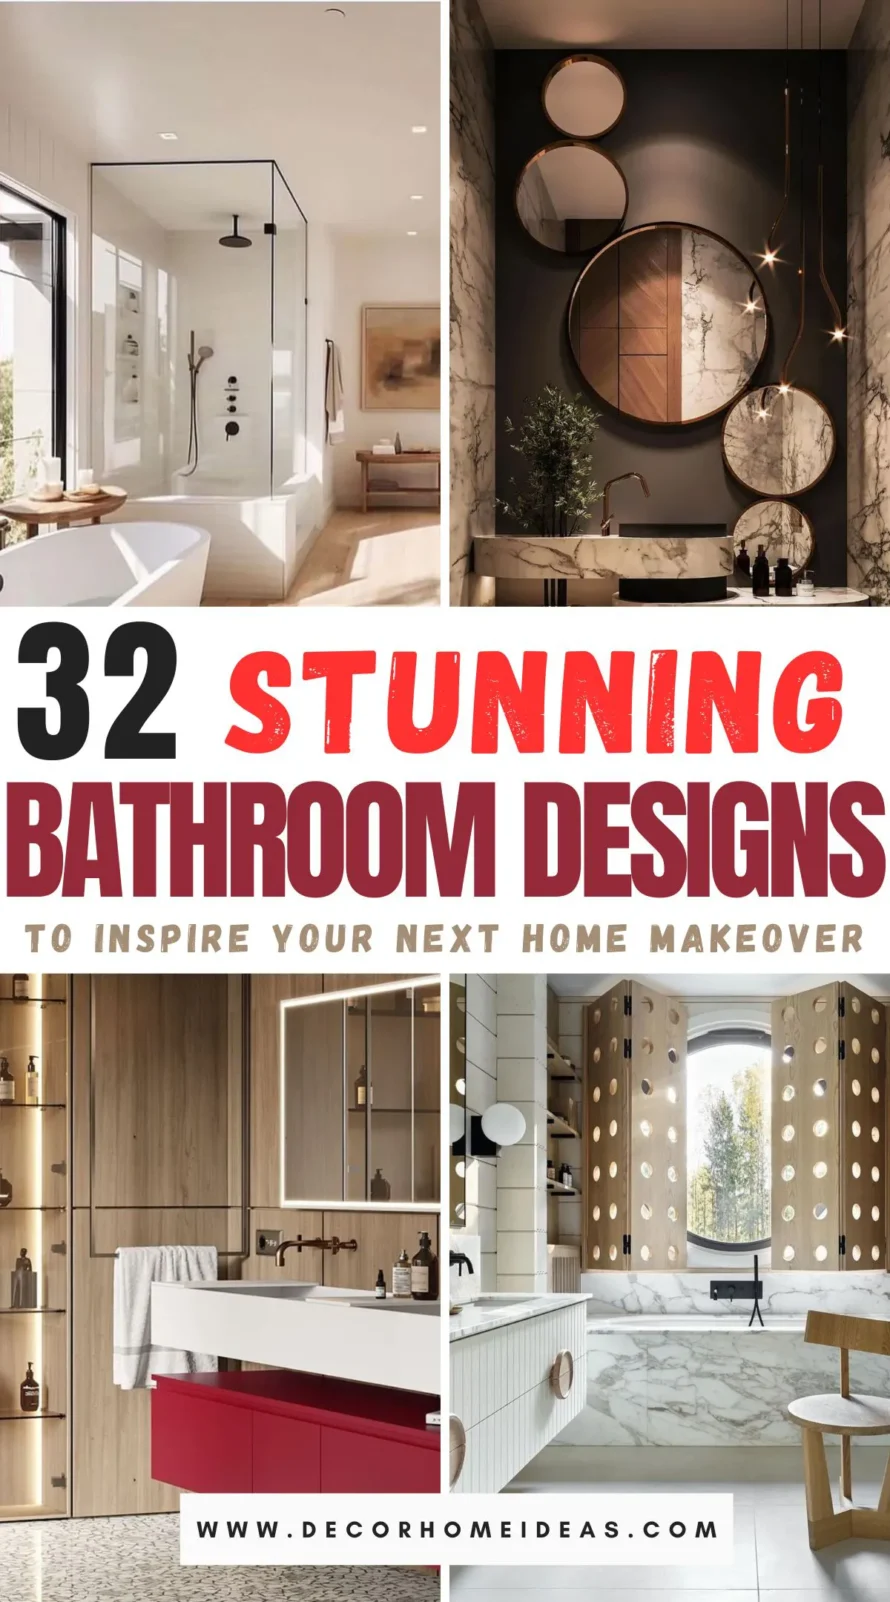 Transform your home with these 32 stunning bathroom designs! From sleek modern spaces to cozy rustic retreats, discover a variety of styles and ideas that will inspire your next makeover. Whether you're dreaming of a spa-like sanctuary or a bold, colorful statement, these designs have something for every taste. Ready to be inspired? Dive in and start planning your dream bathroom today!